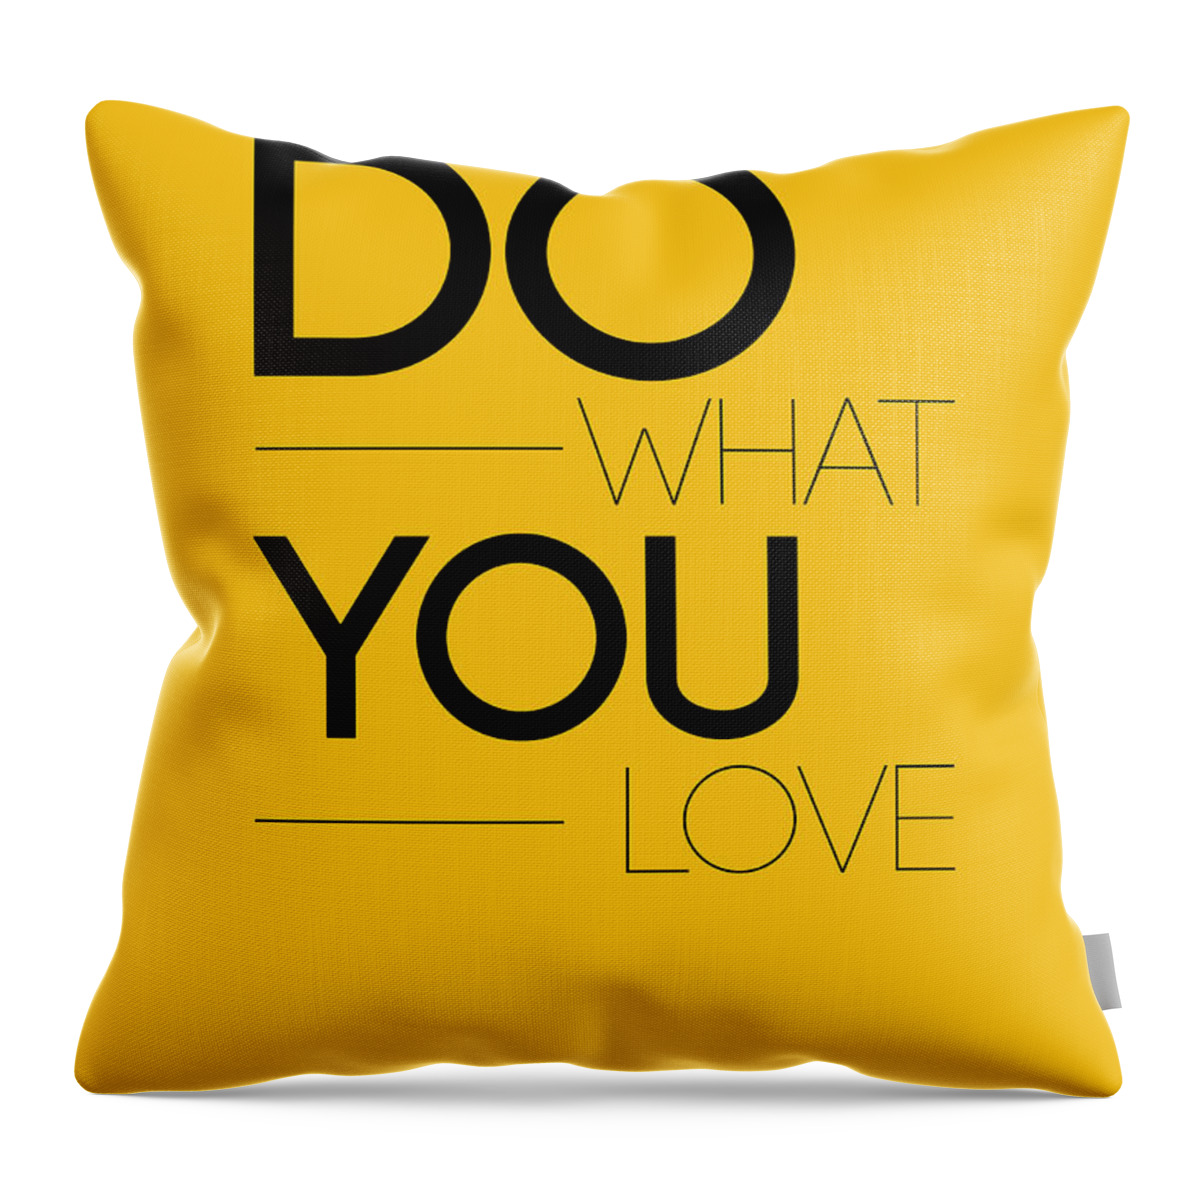 Love Throw Pillow featuring the digital art Do What You Love Poster 2 by Naxart Studio